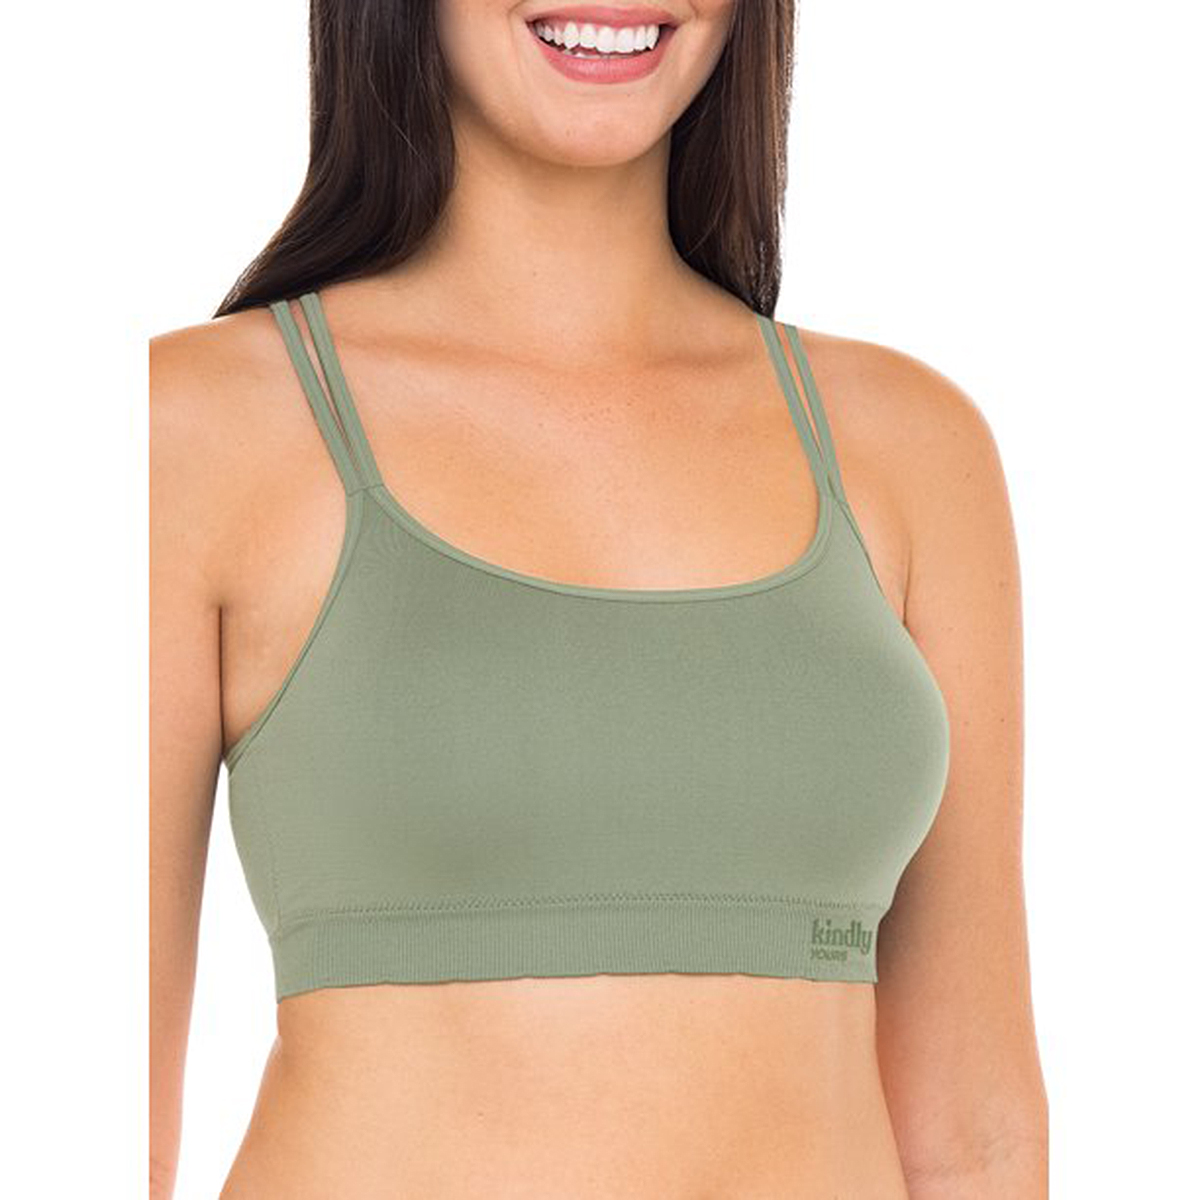 walmart-kindly-yours-seamless-x-back-bralette-green